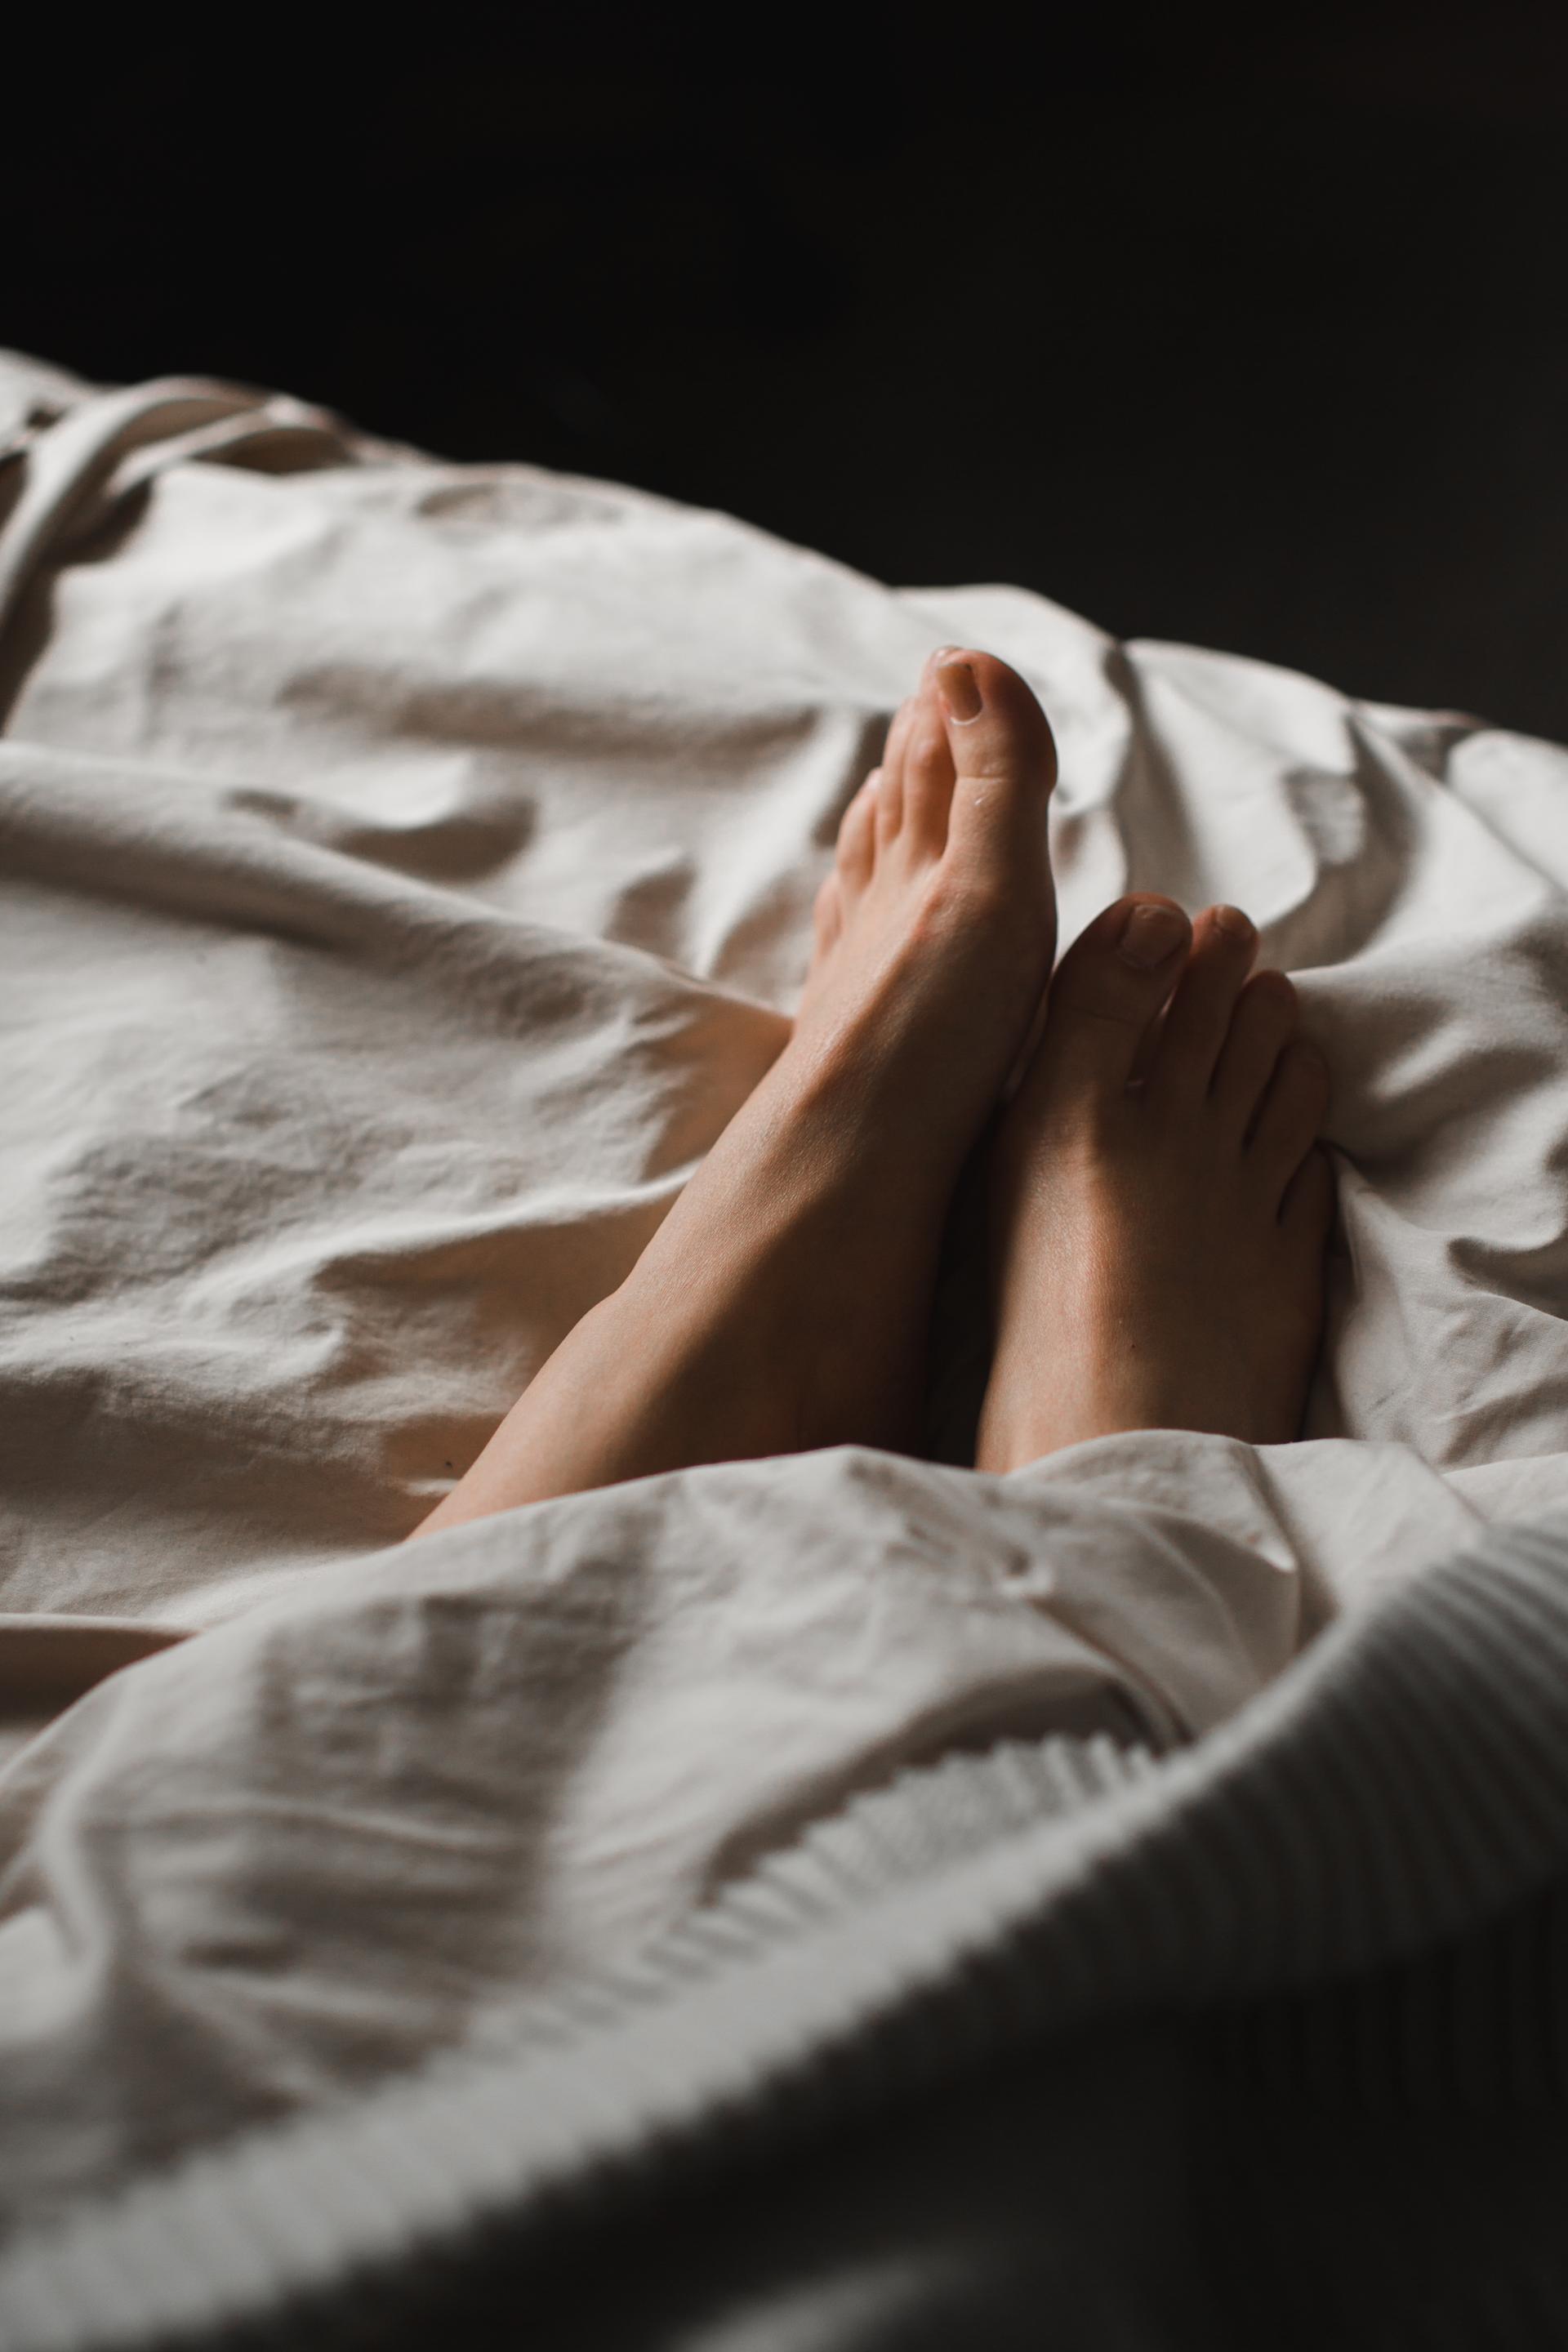 If This Occurs To Your Body, You'Re Probably Not Getting Enough Sleep